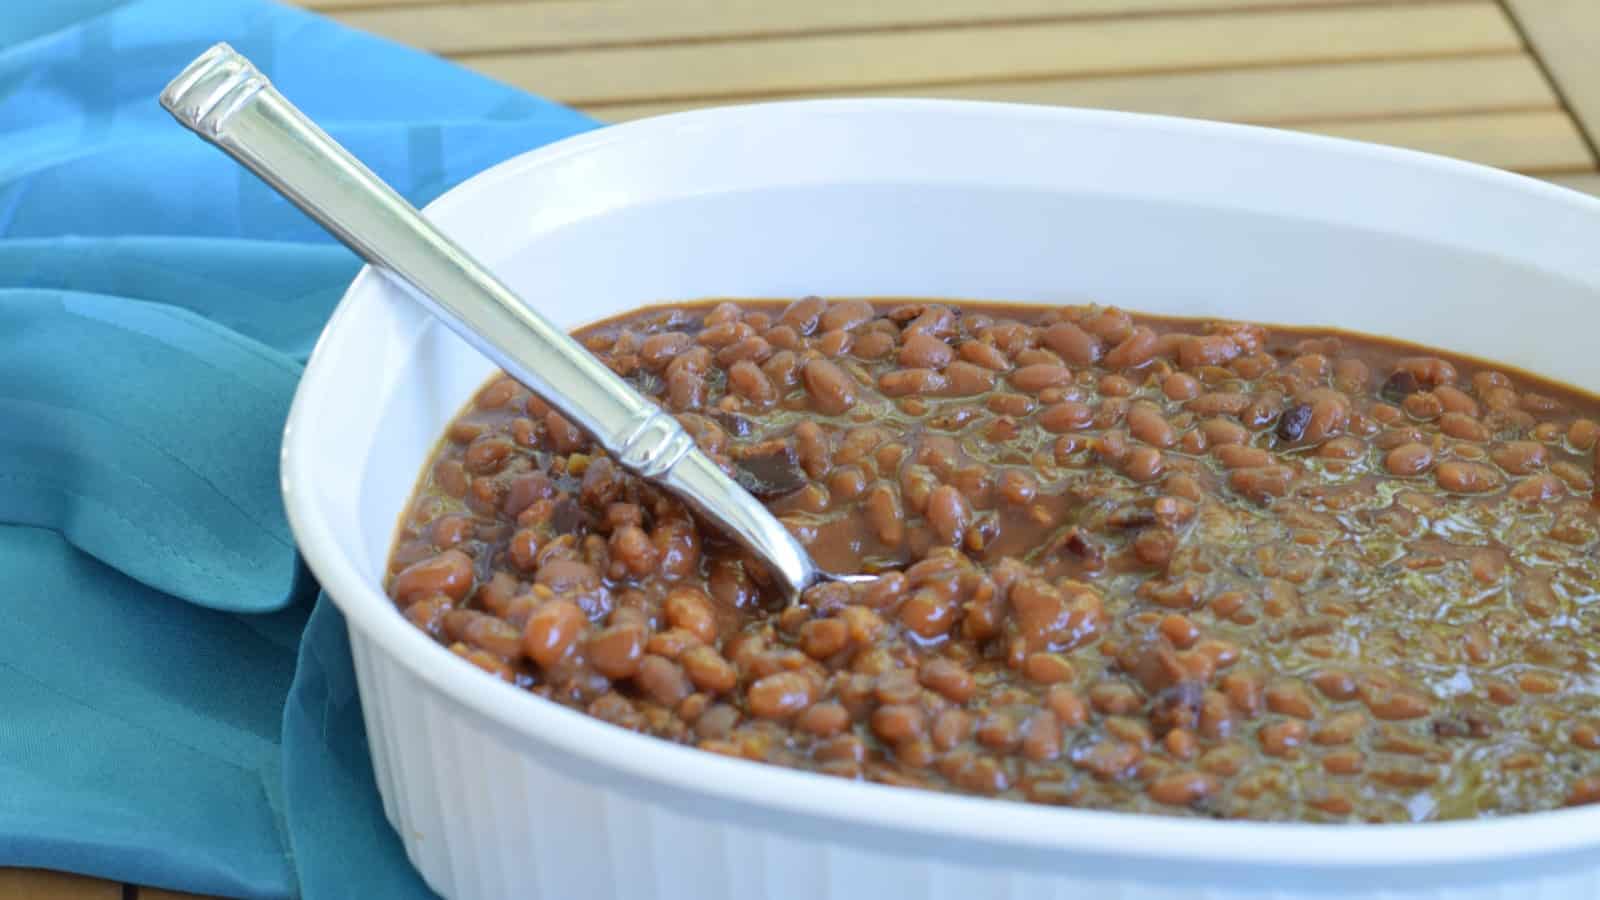 Pot of homemade baked beans on a wooden table.